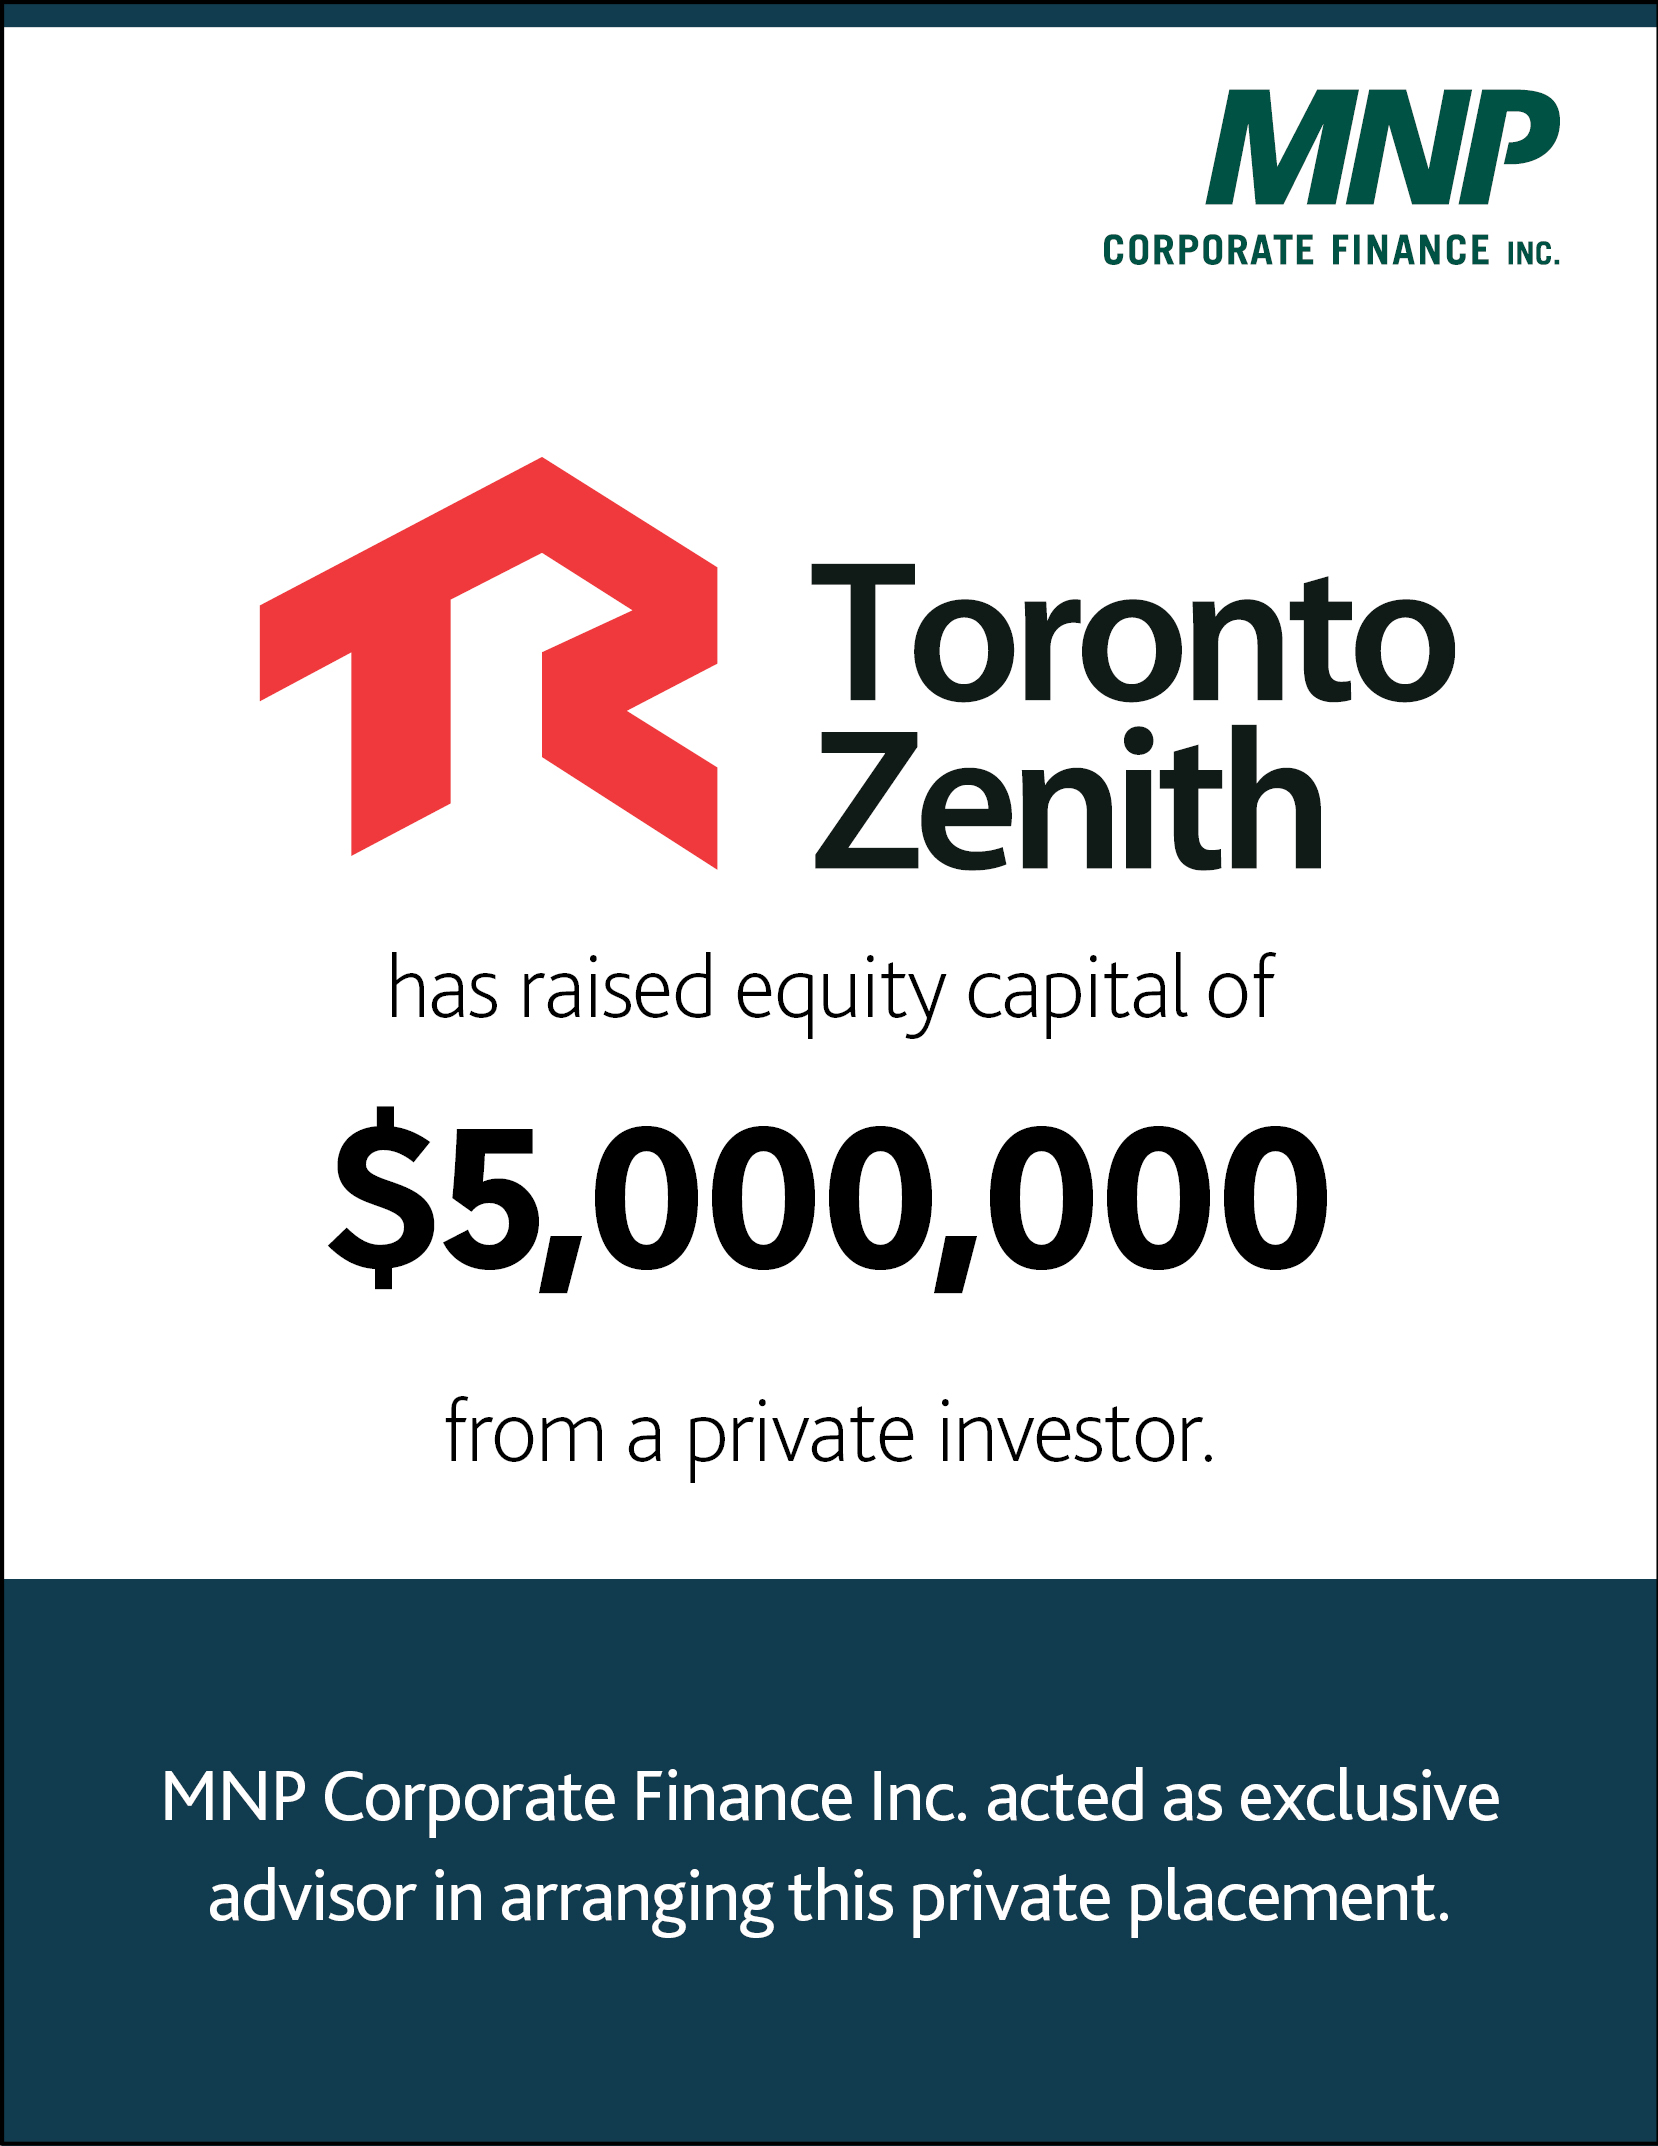 Toronto Zenith Contracting Ltd. has raised equity capital of $5,000,000 from a private investor.